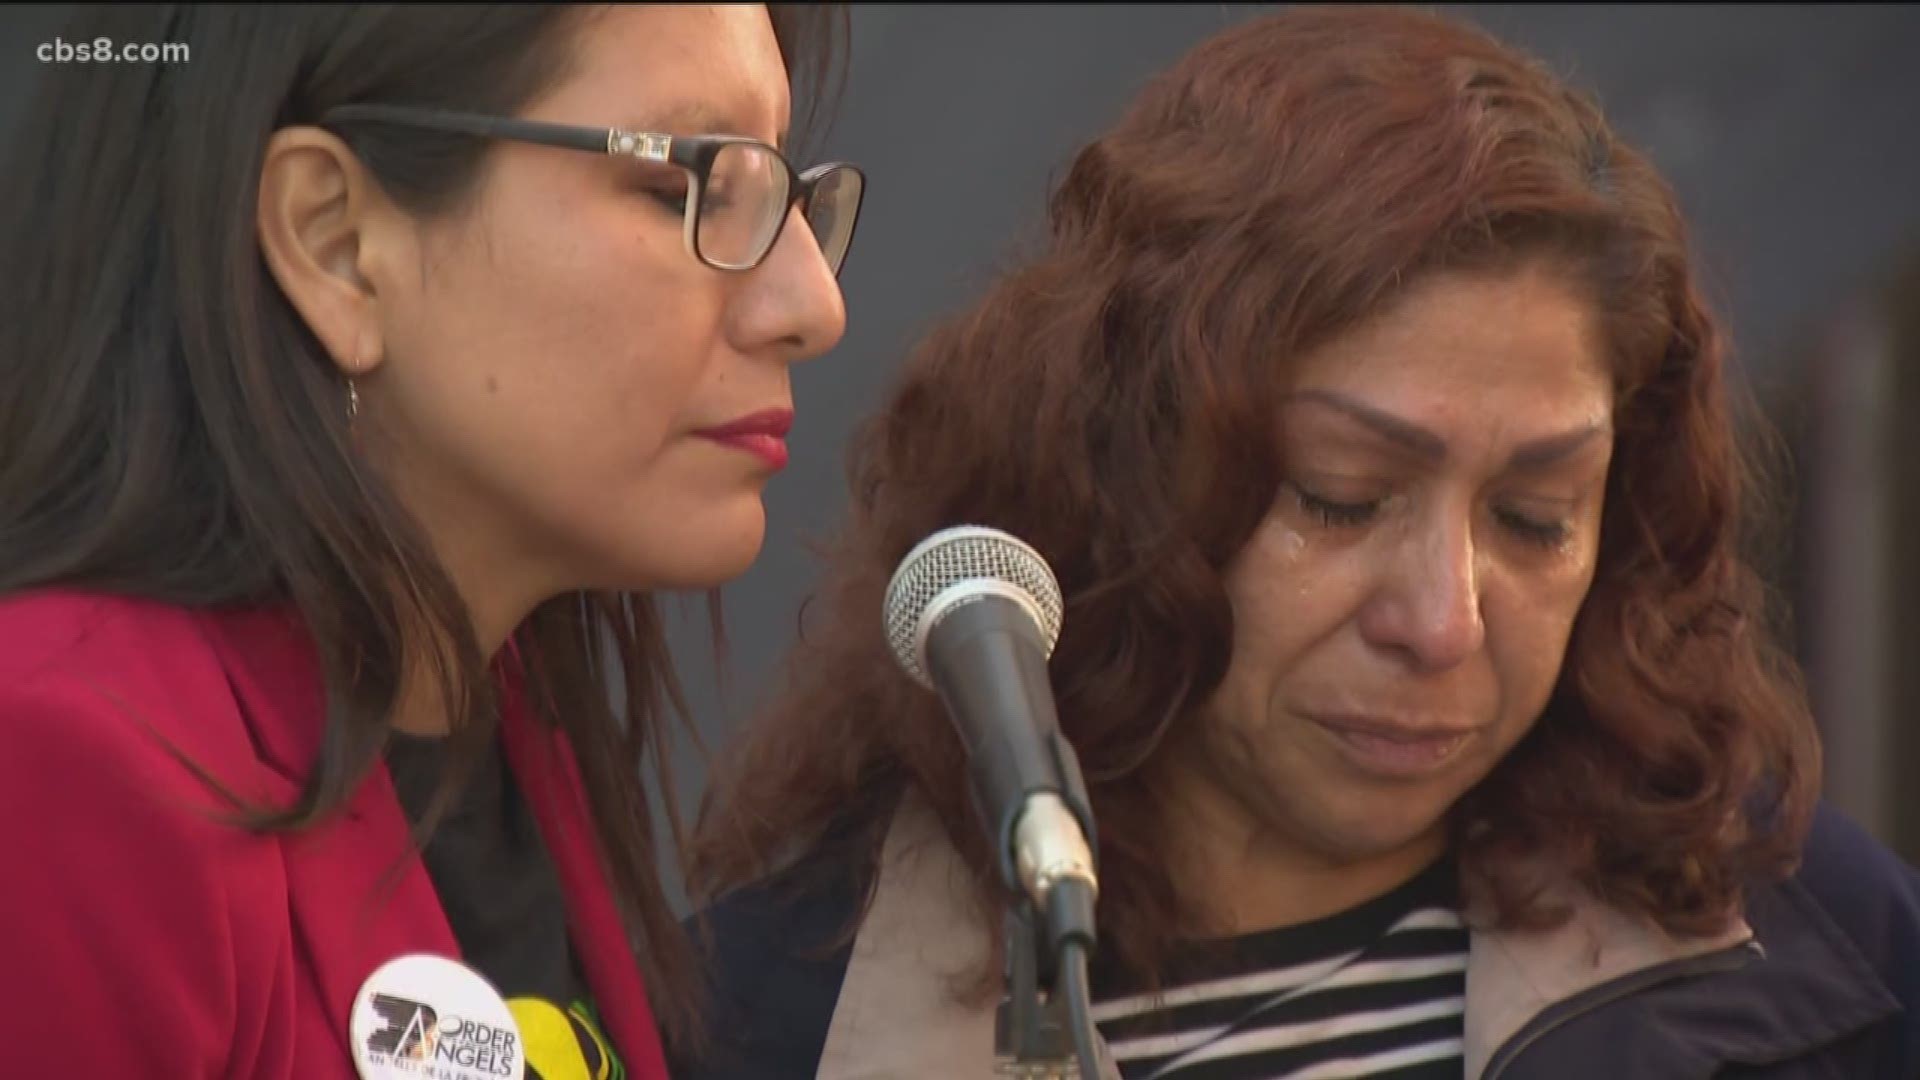 A San Diego mother, who lived and worked in the United Sates for more than three decades, was deported by Immigration and Customs Enforcement (ICE) Thursday morning.